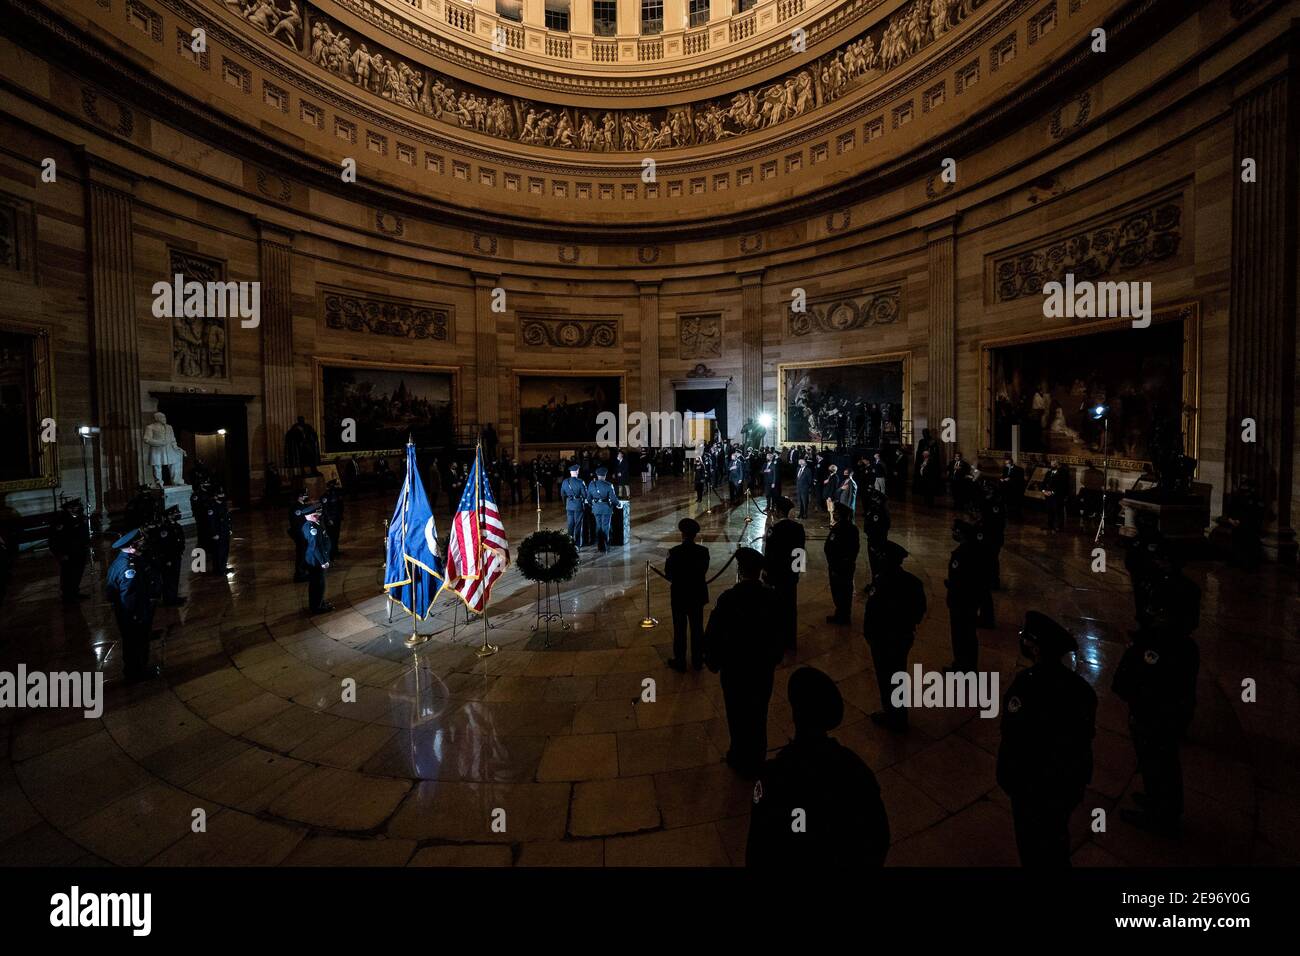 Washington, United States. 02nd Feb, 2021. Members of the Capitol Police prepare for the arrival of the late Capitol Police Officer Brian Sicknick's remains in the Capitol in Washington, DC on Tuesday, February 2, 2021. Officer Sicknick will lie in honor in the Rotunda of the Capitol. Officer Sicknick died on January 7th after engaging with rioters on January 6th while protecting the Capitol. Pool photo by Erin Schaff/UPI Credit: UPI/Alamy Live News Stock Photo